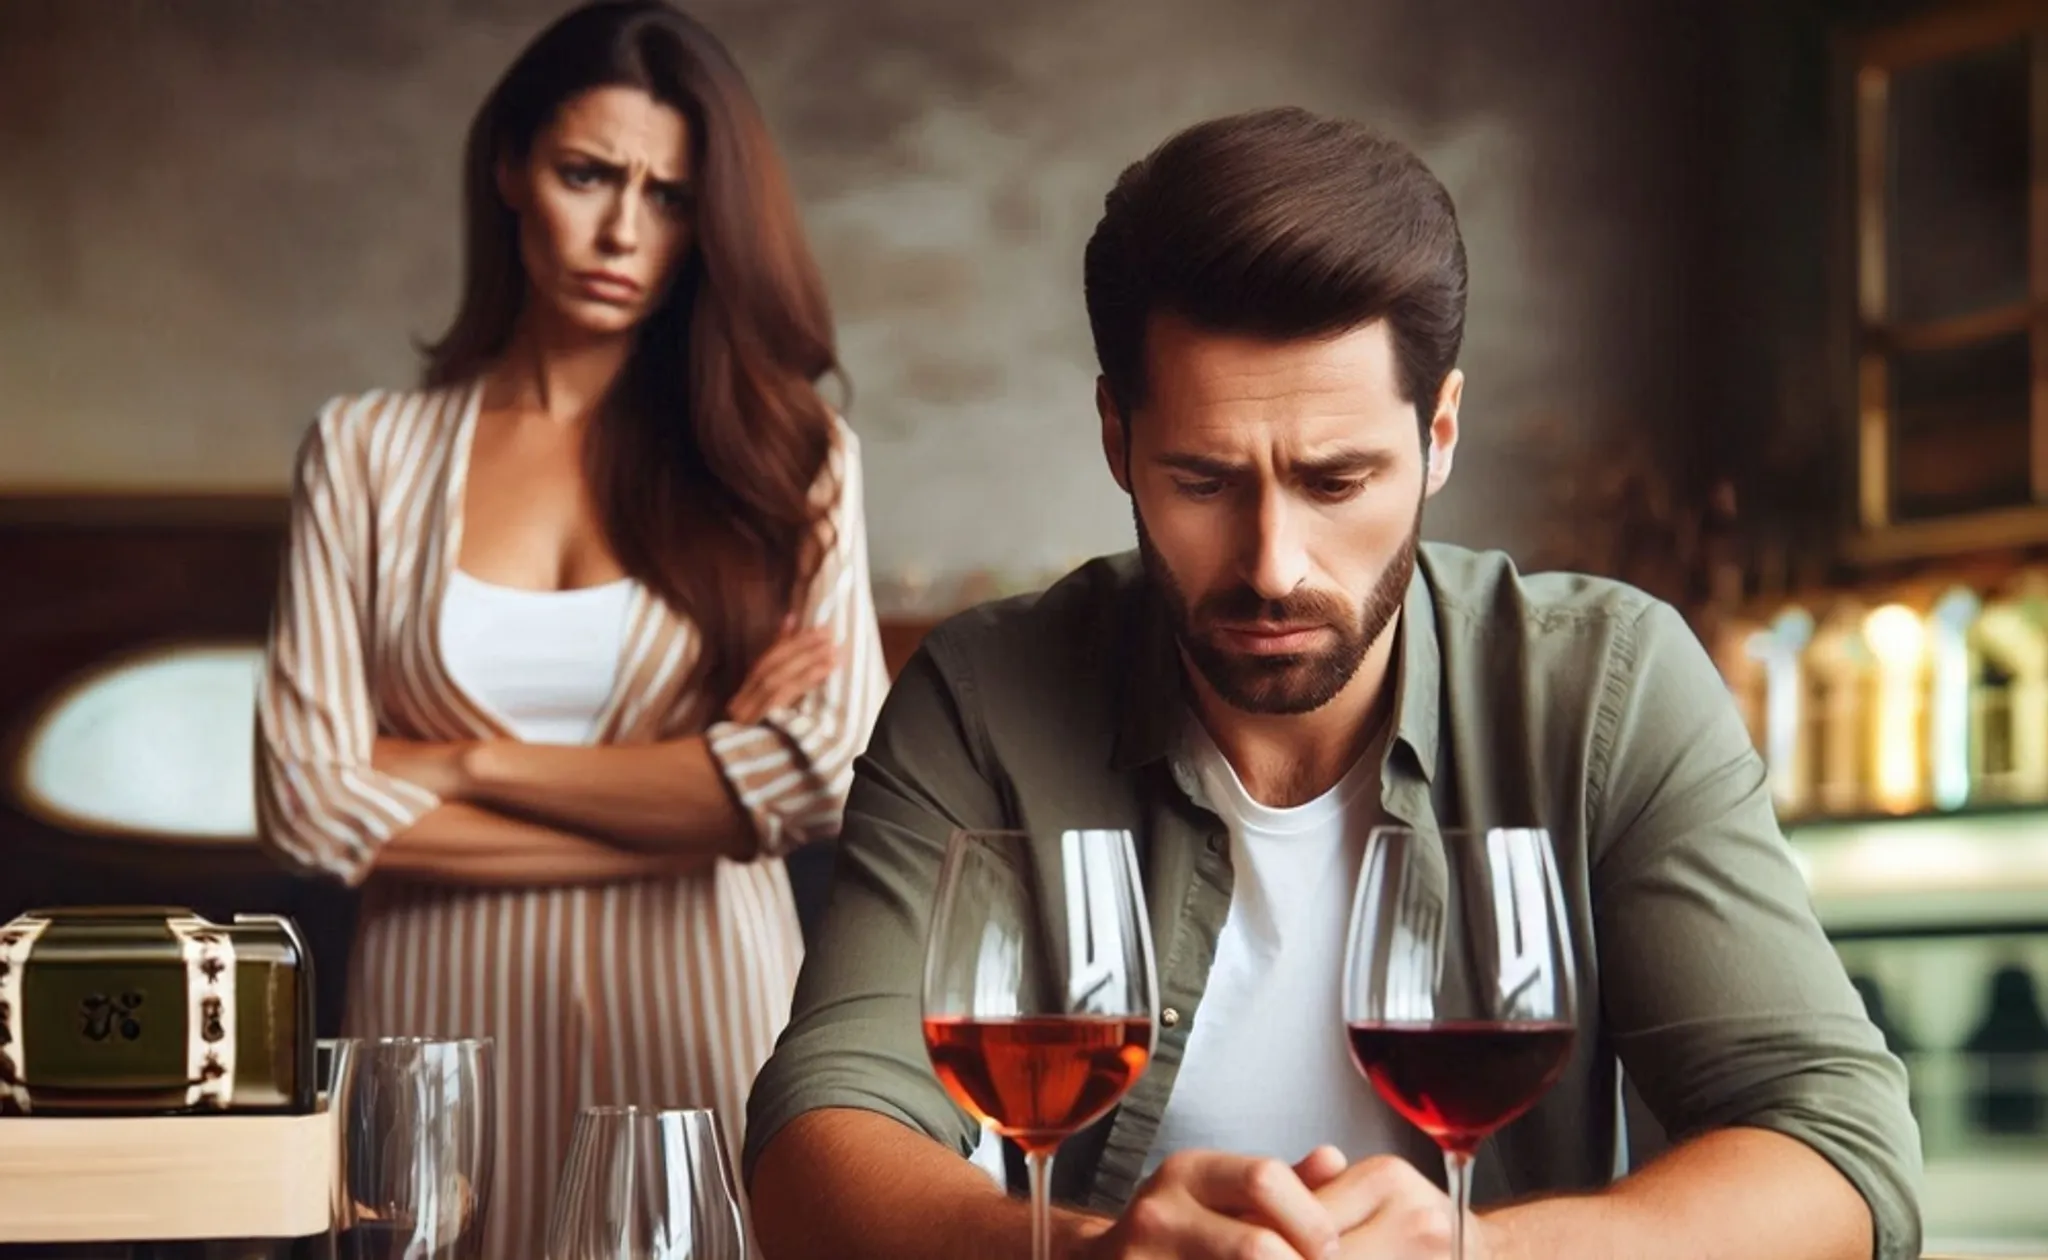 10 Reasons Why Married Men Cheat on Their Wives